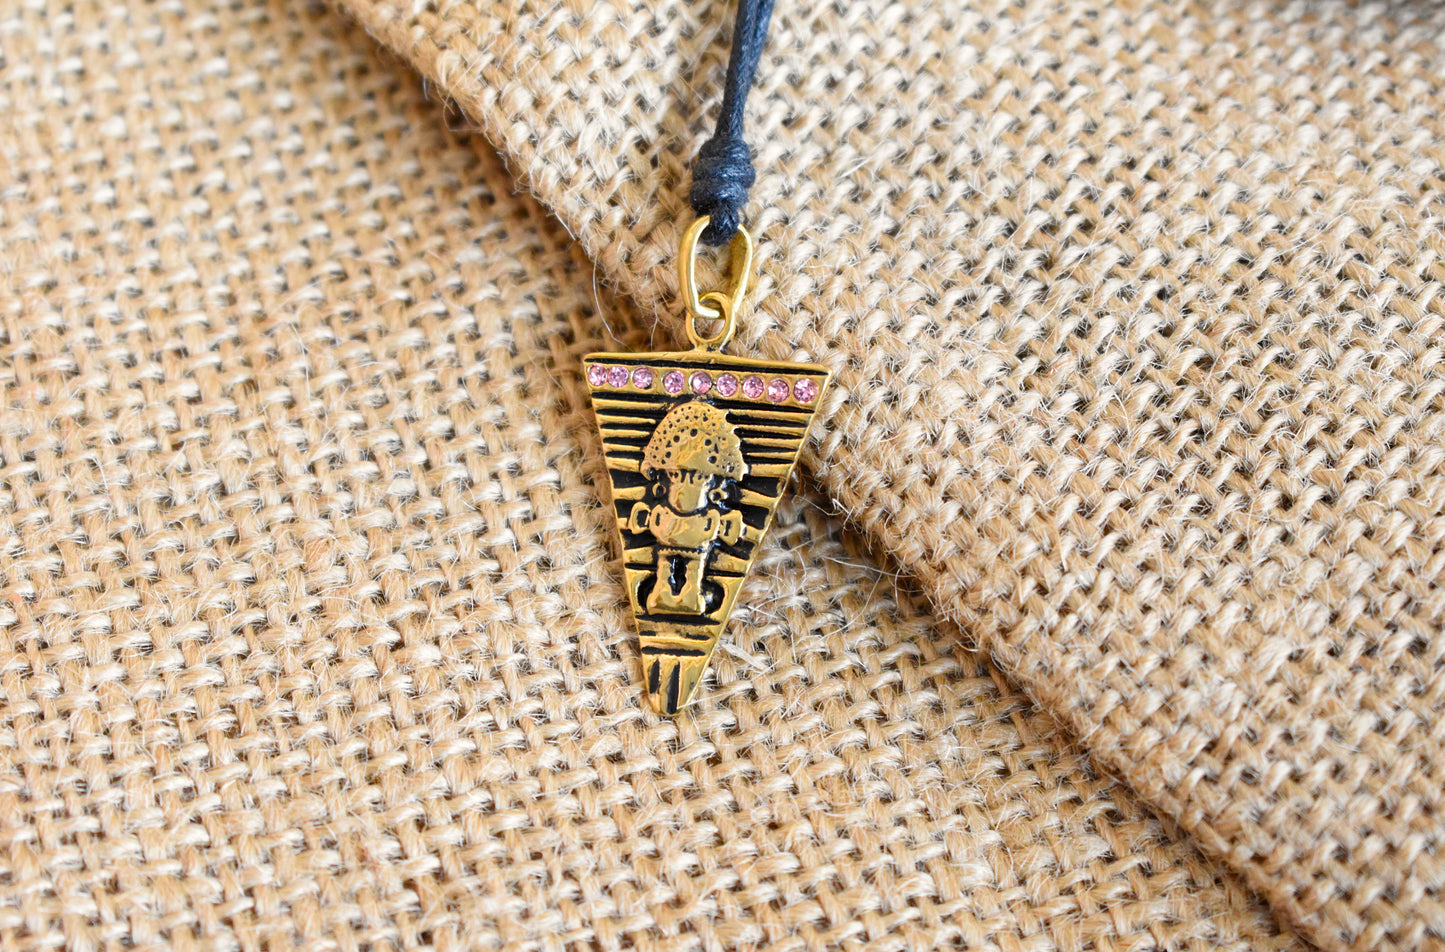 Aztec Mayan Design Silver Pewter Gold Brass Charm Necklace Pendant Jewelry